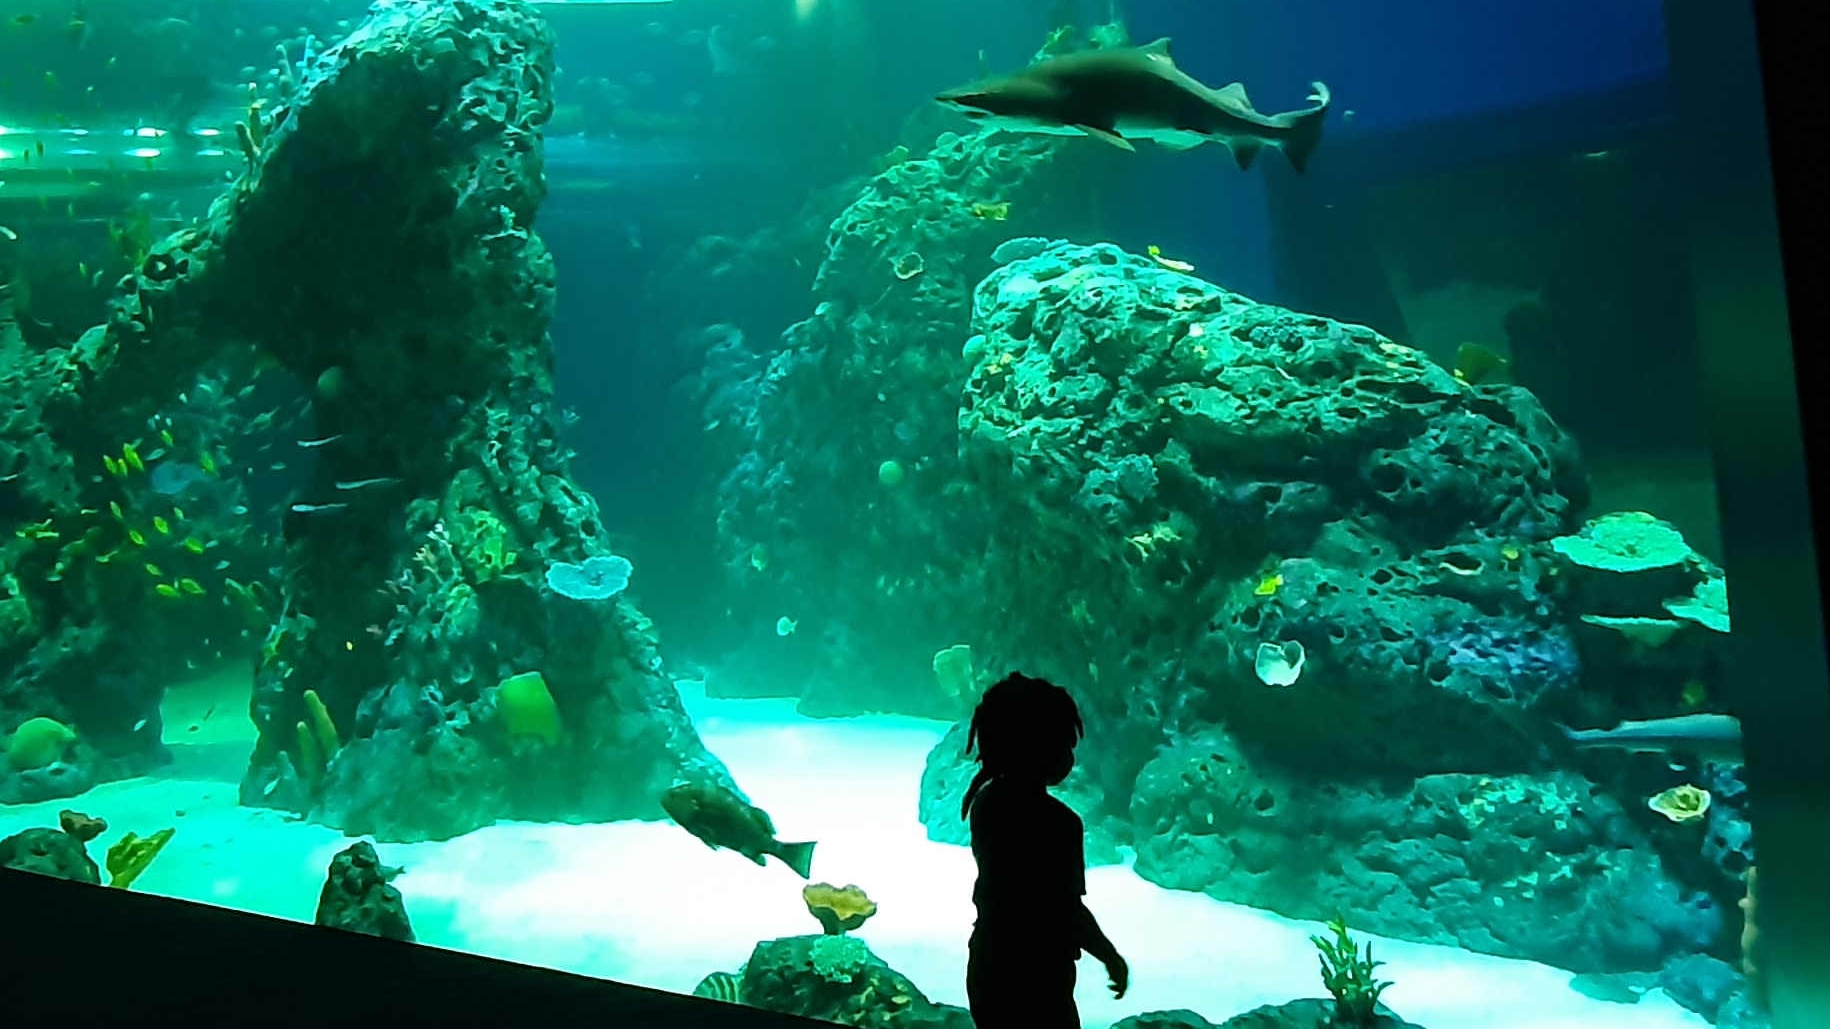 Mississippi Aquarium: New attraction poised to be regional draw